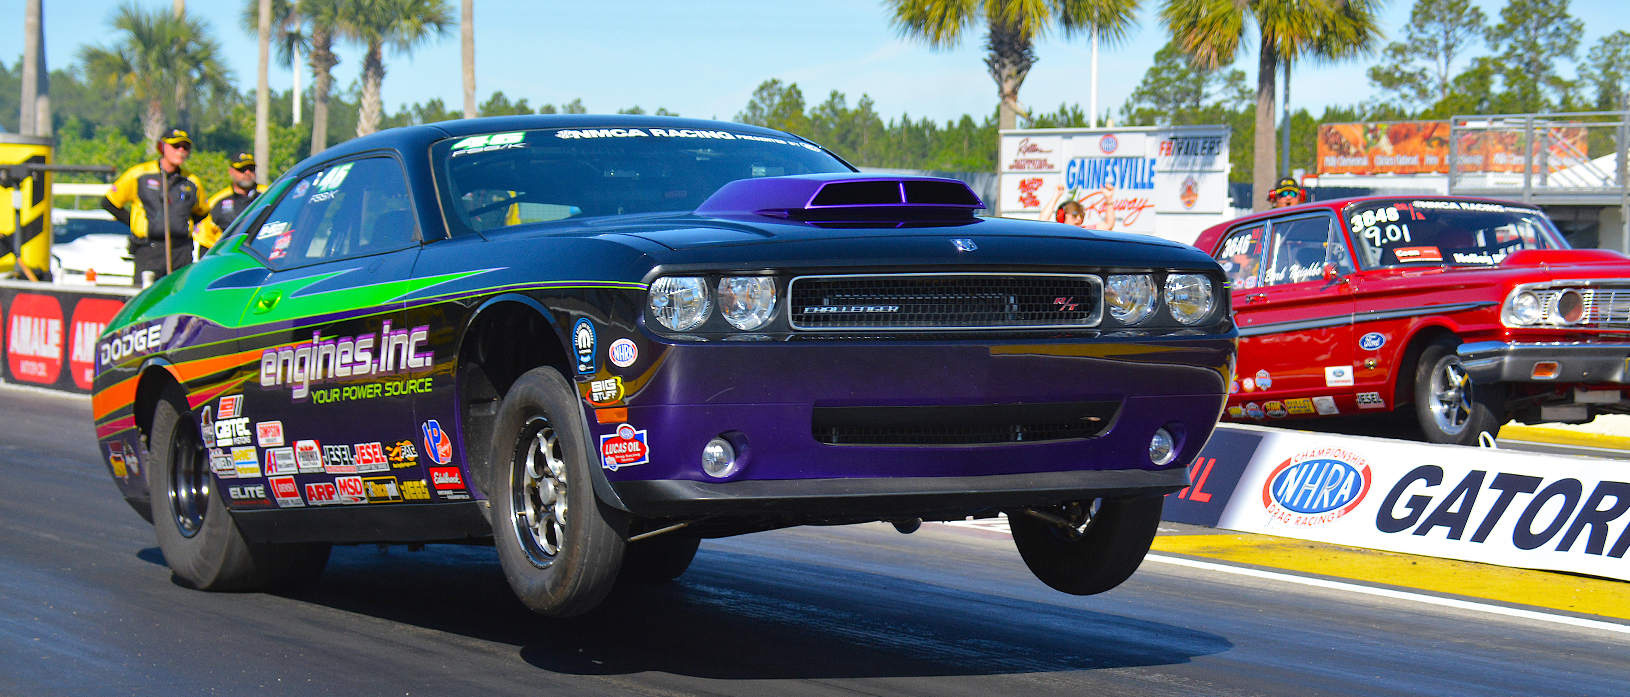 dodge challenger on the starting line of a drag strip